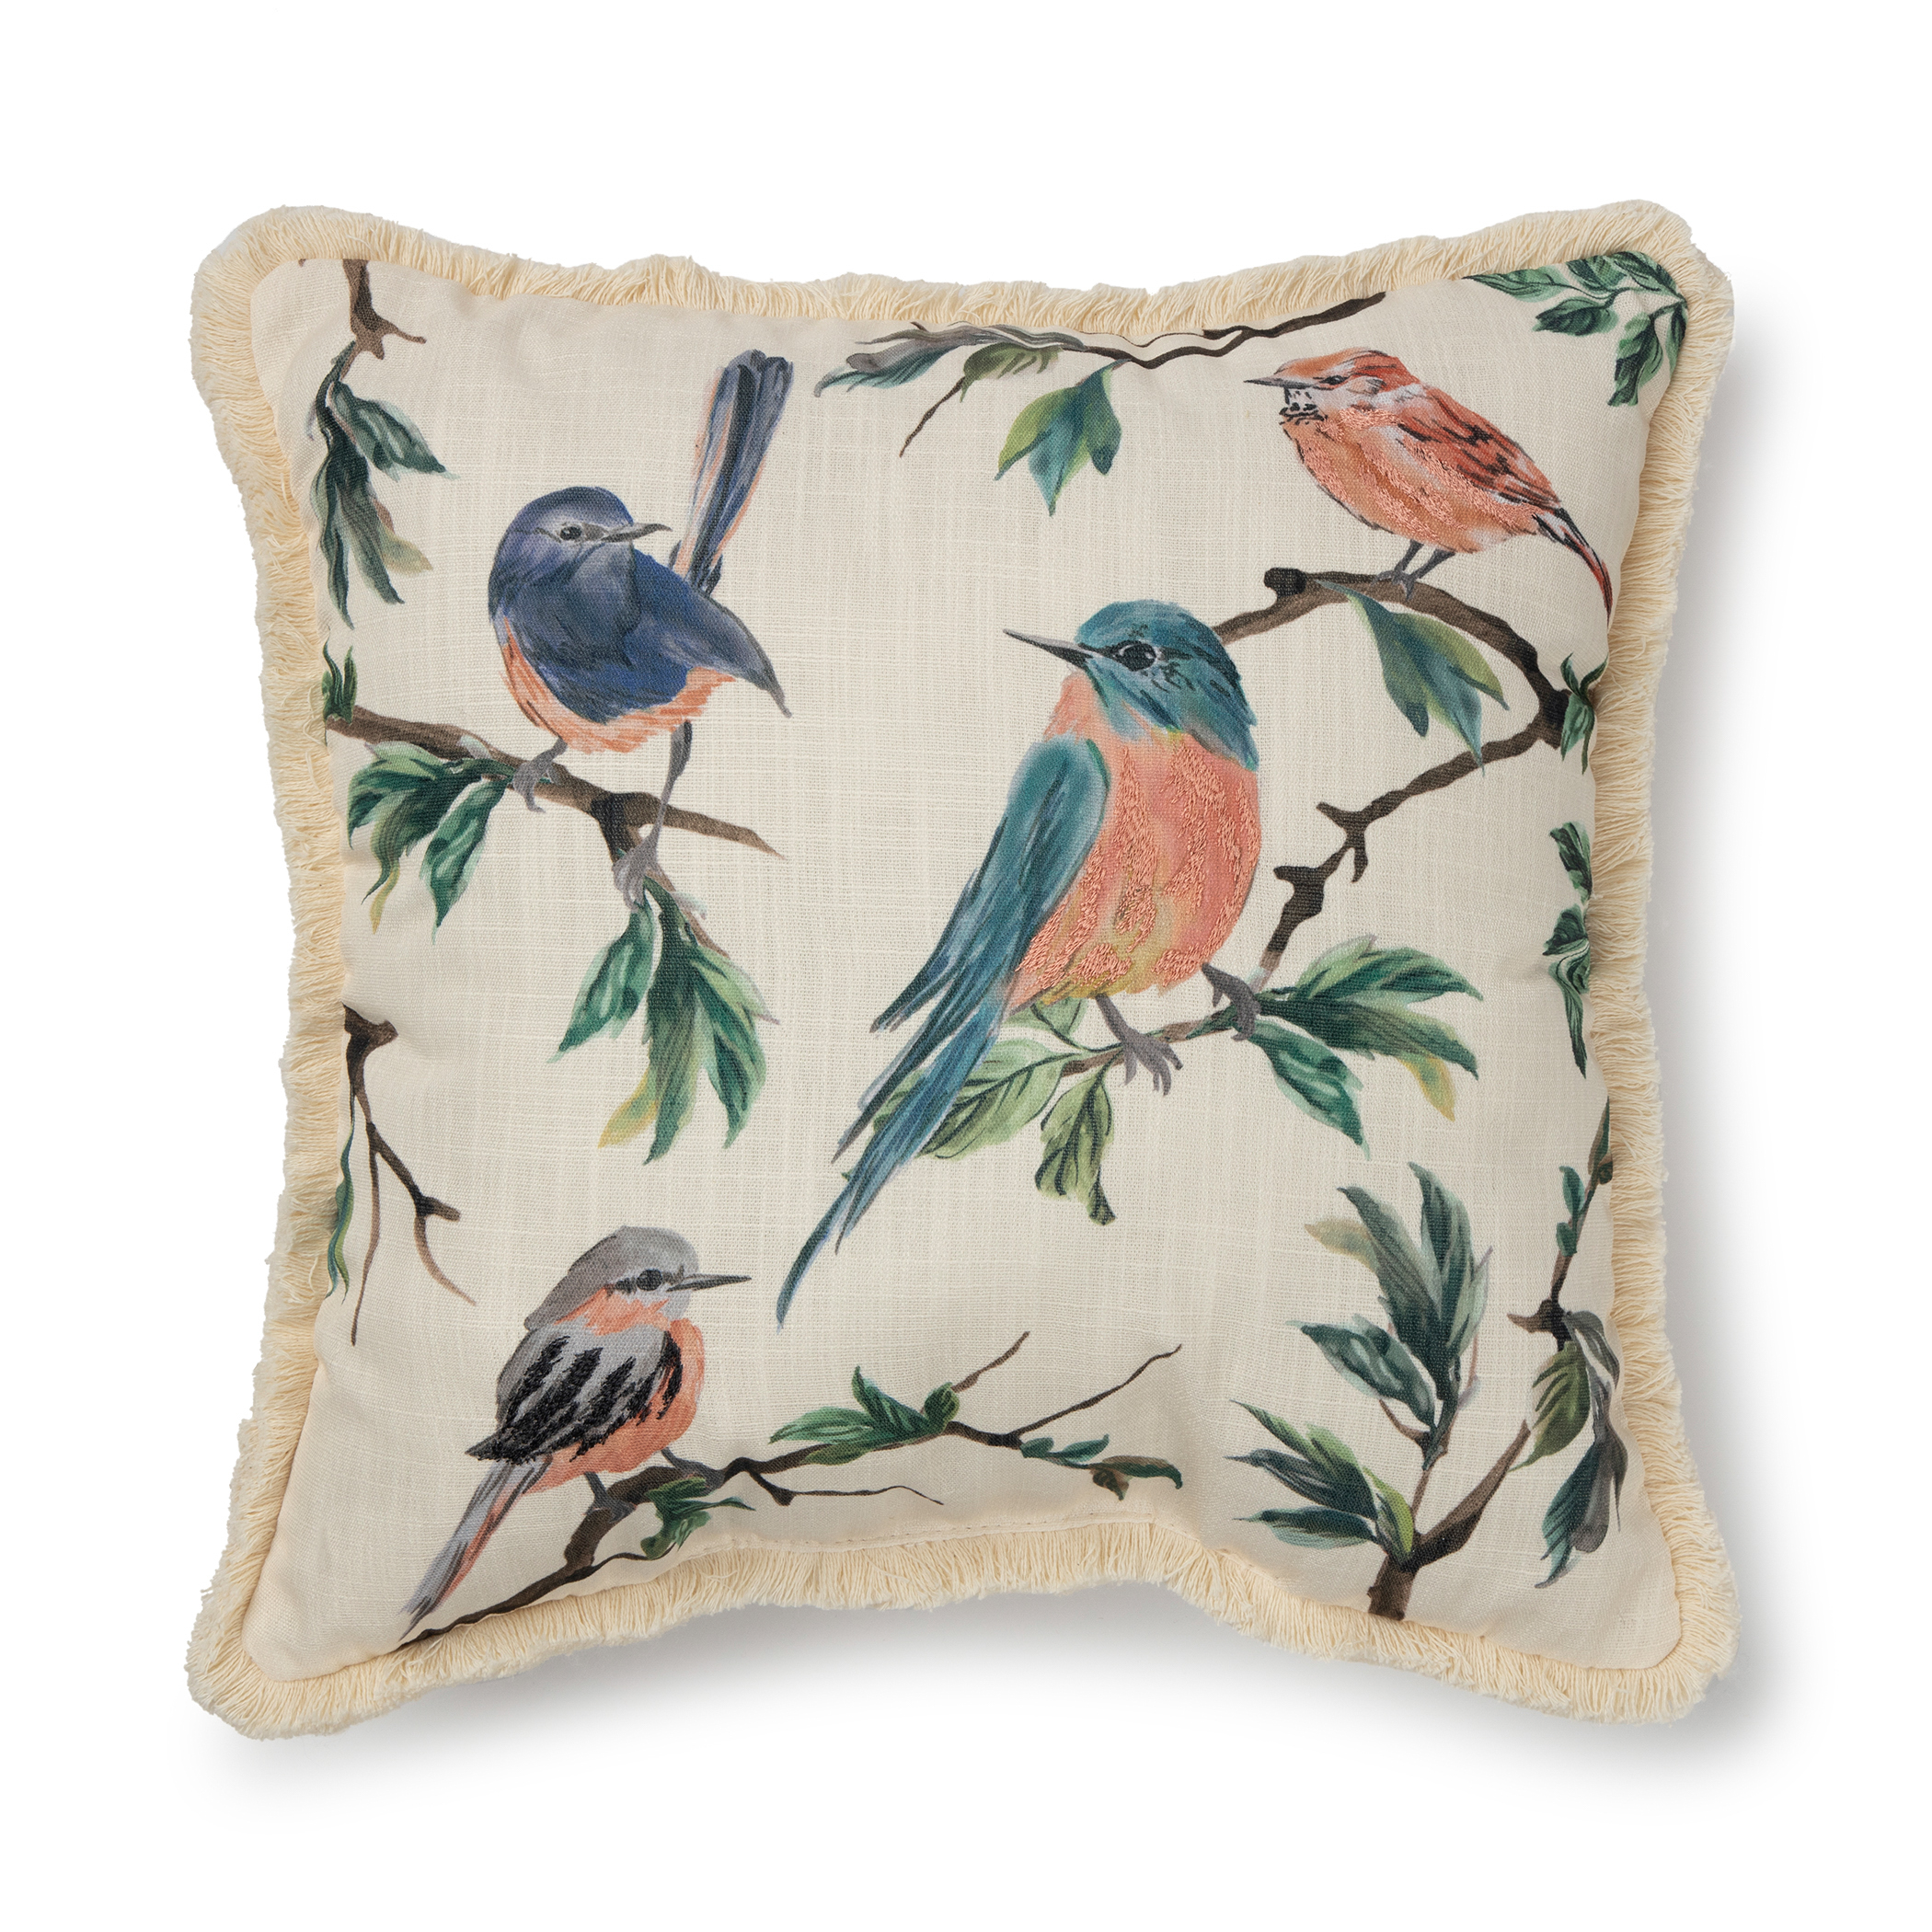 Mainstays Printed Bird Decorative Square Pillow, 18x18, Multi-Color, 1 per Pack - image 1 of 5